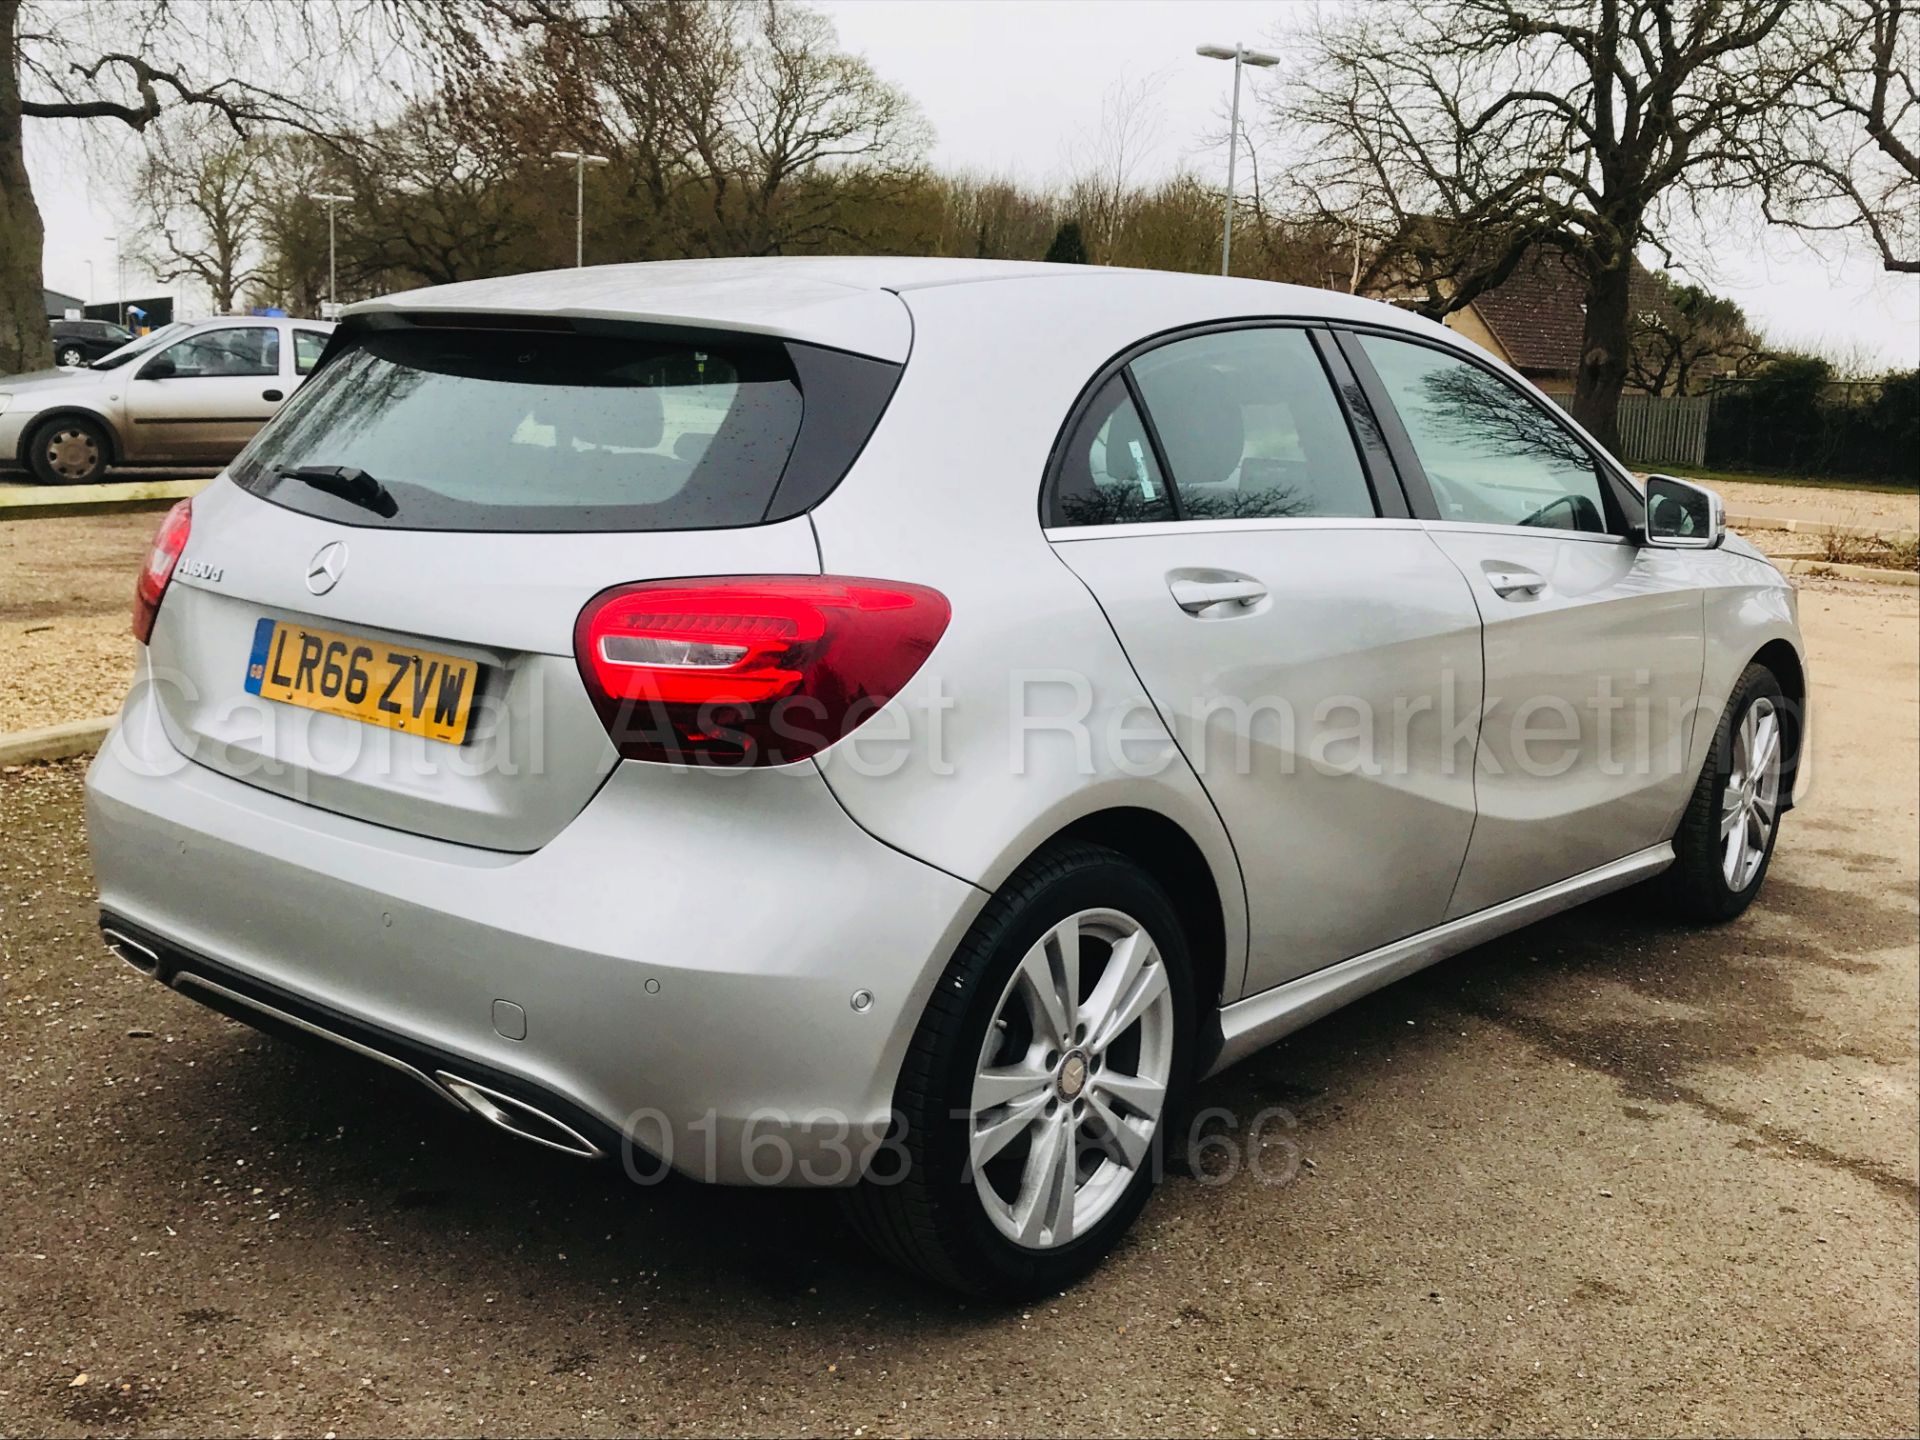 MERCEDES-BENZ A180D 'SPORT' (2017 MODEL) '7G TRONIC AUTO - LEATHER - SAT NAV' (1 OWNER FROM NEW) - Image 11 of 41